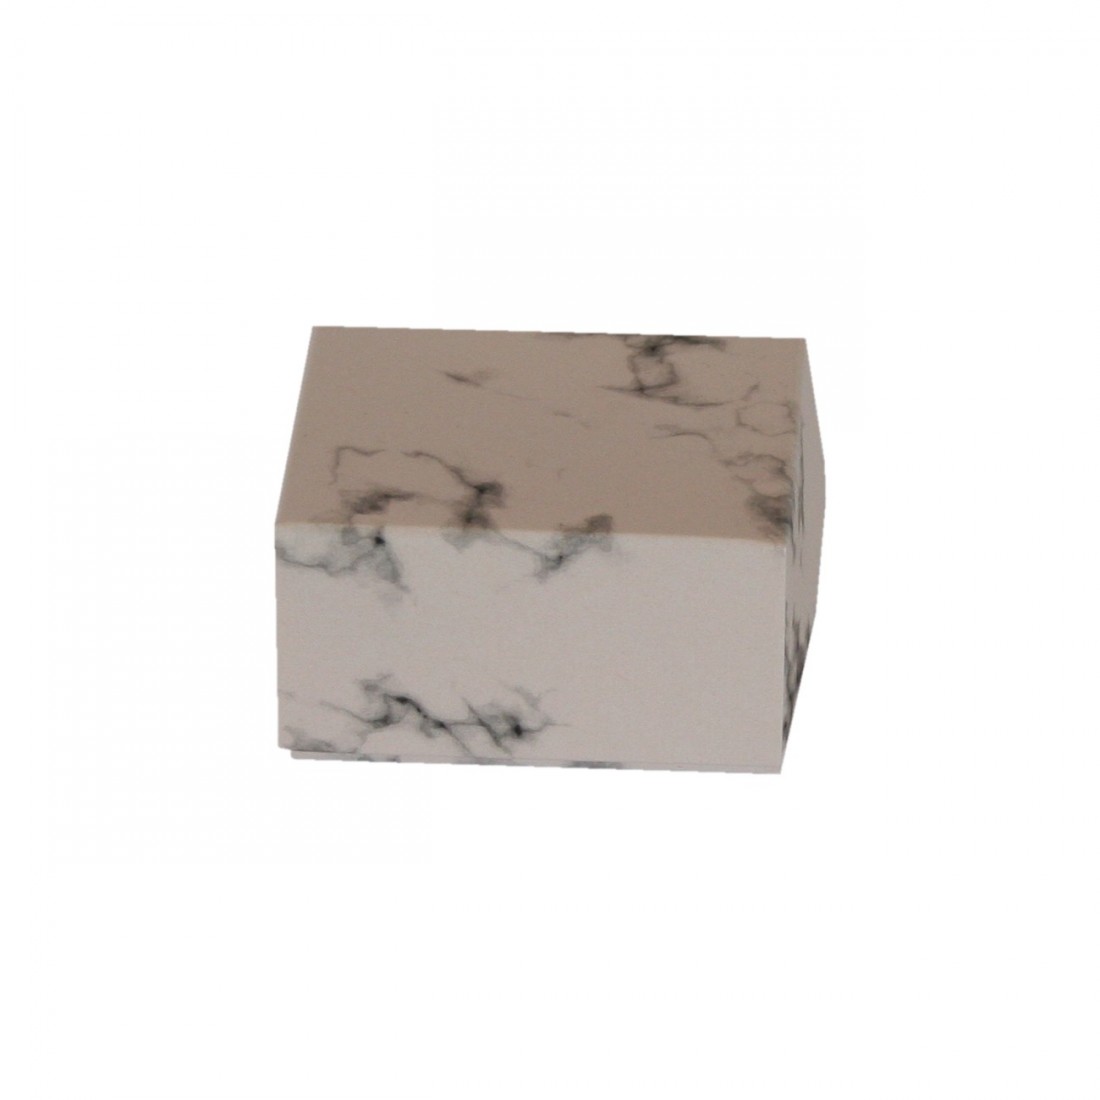 Cardboard jewellery box marble pinted in pink, for ring or earrings.